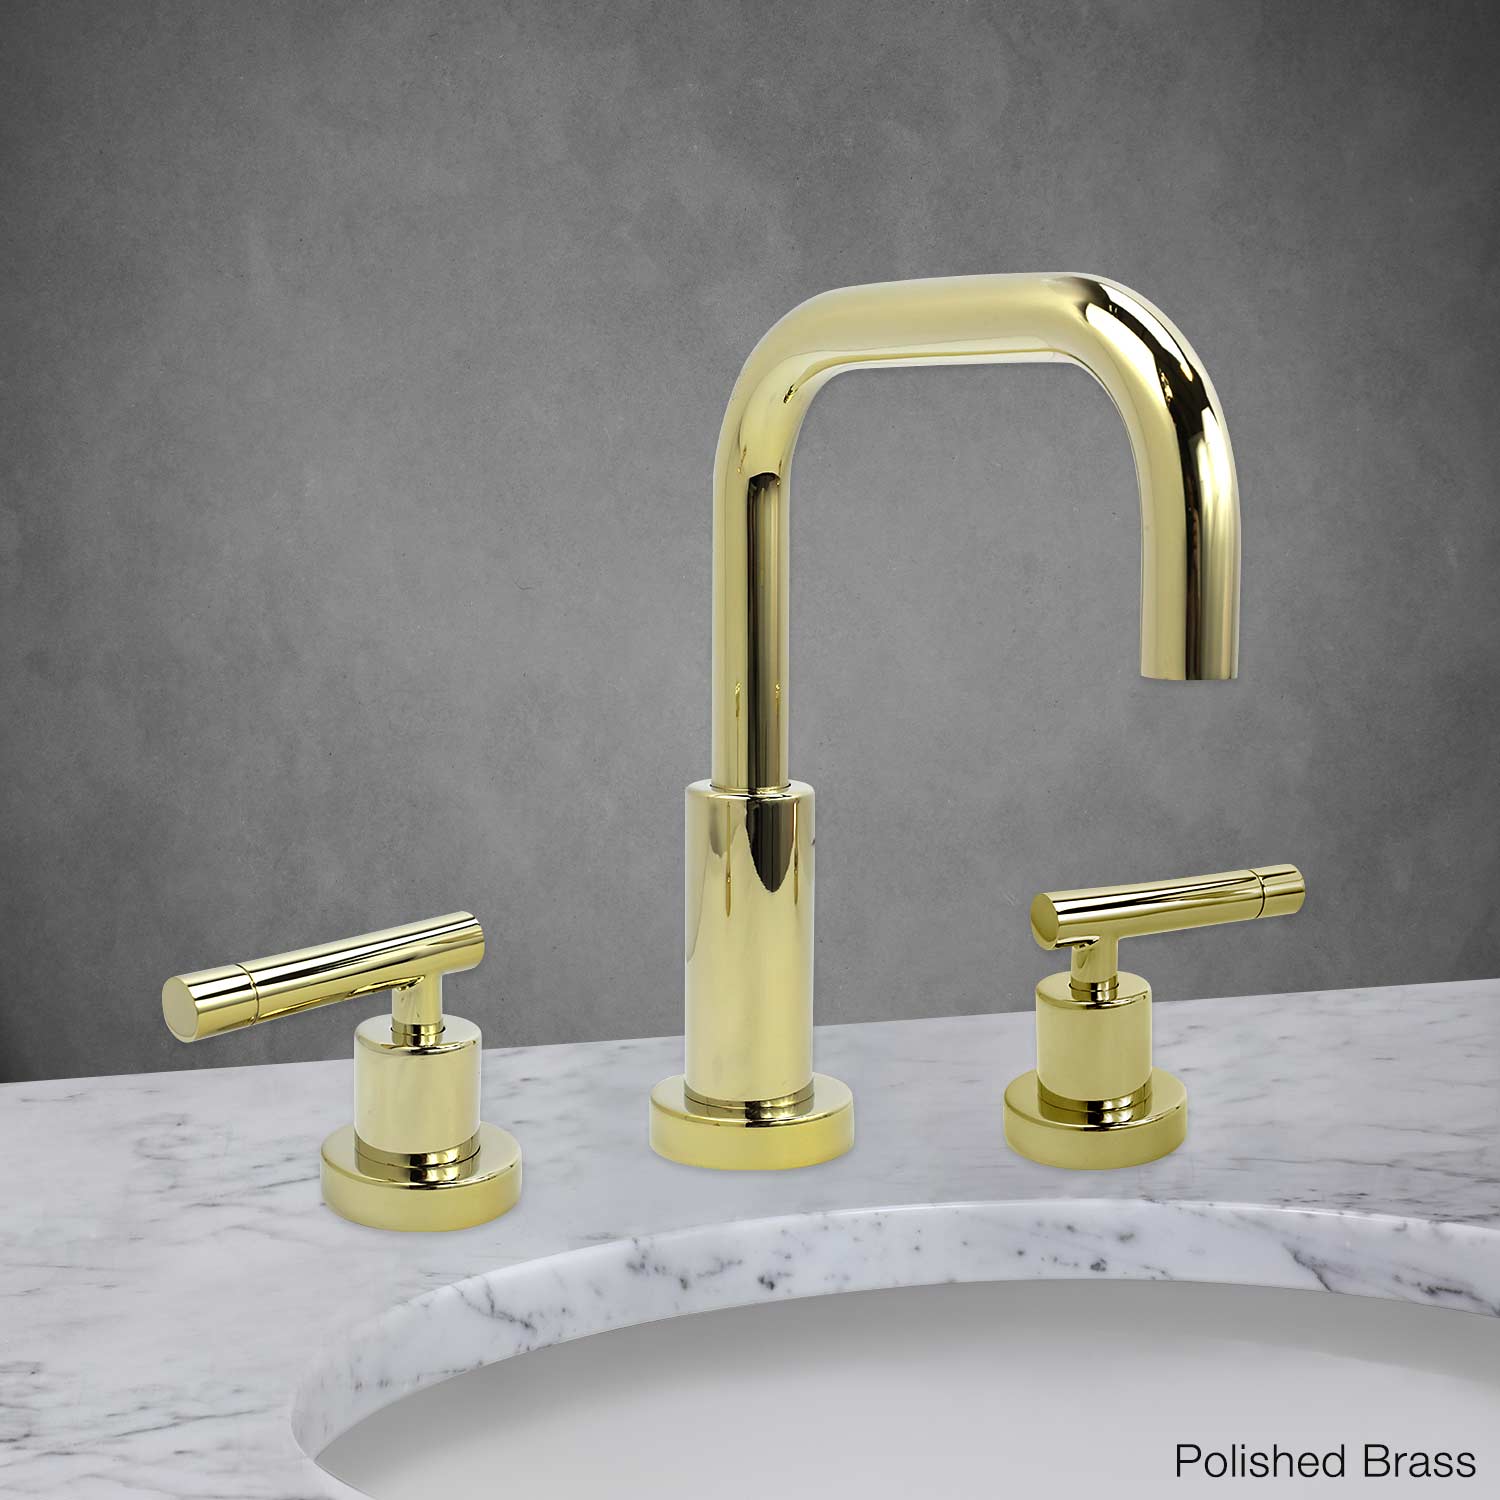 Milano Widespread Lavatory Faucet with Lever Handle in Polished Brass